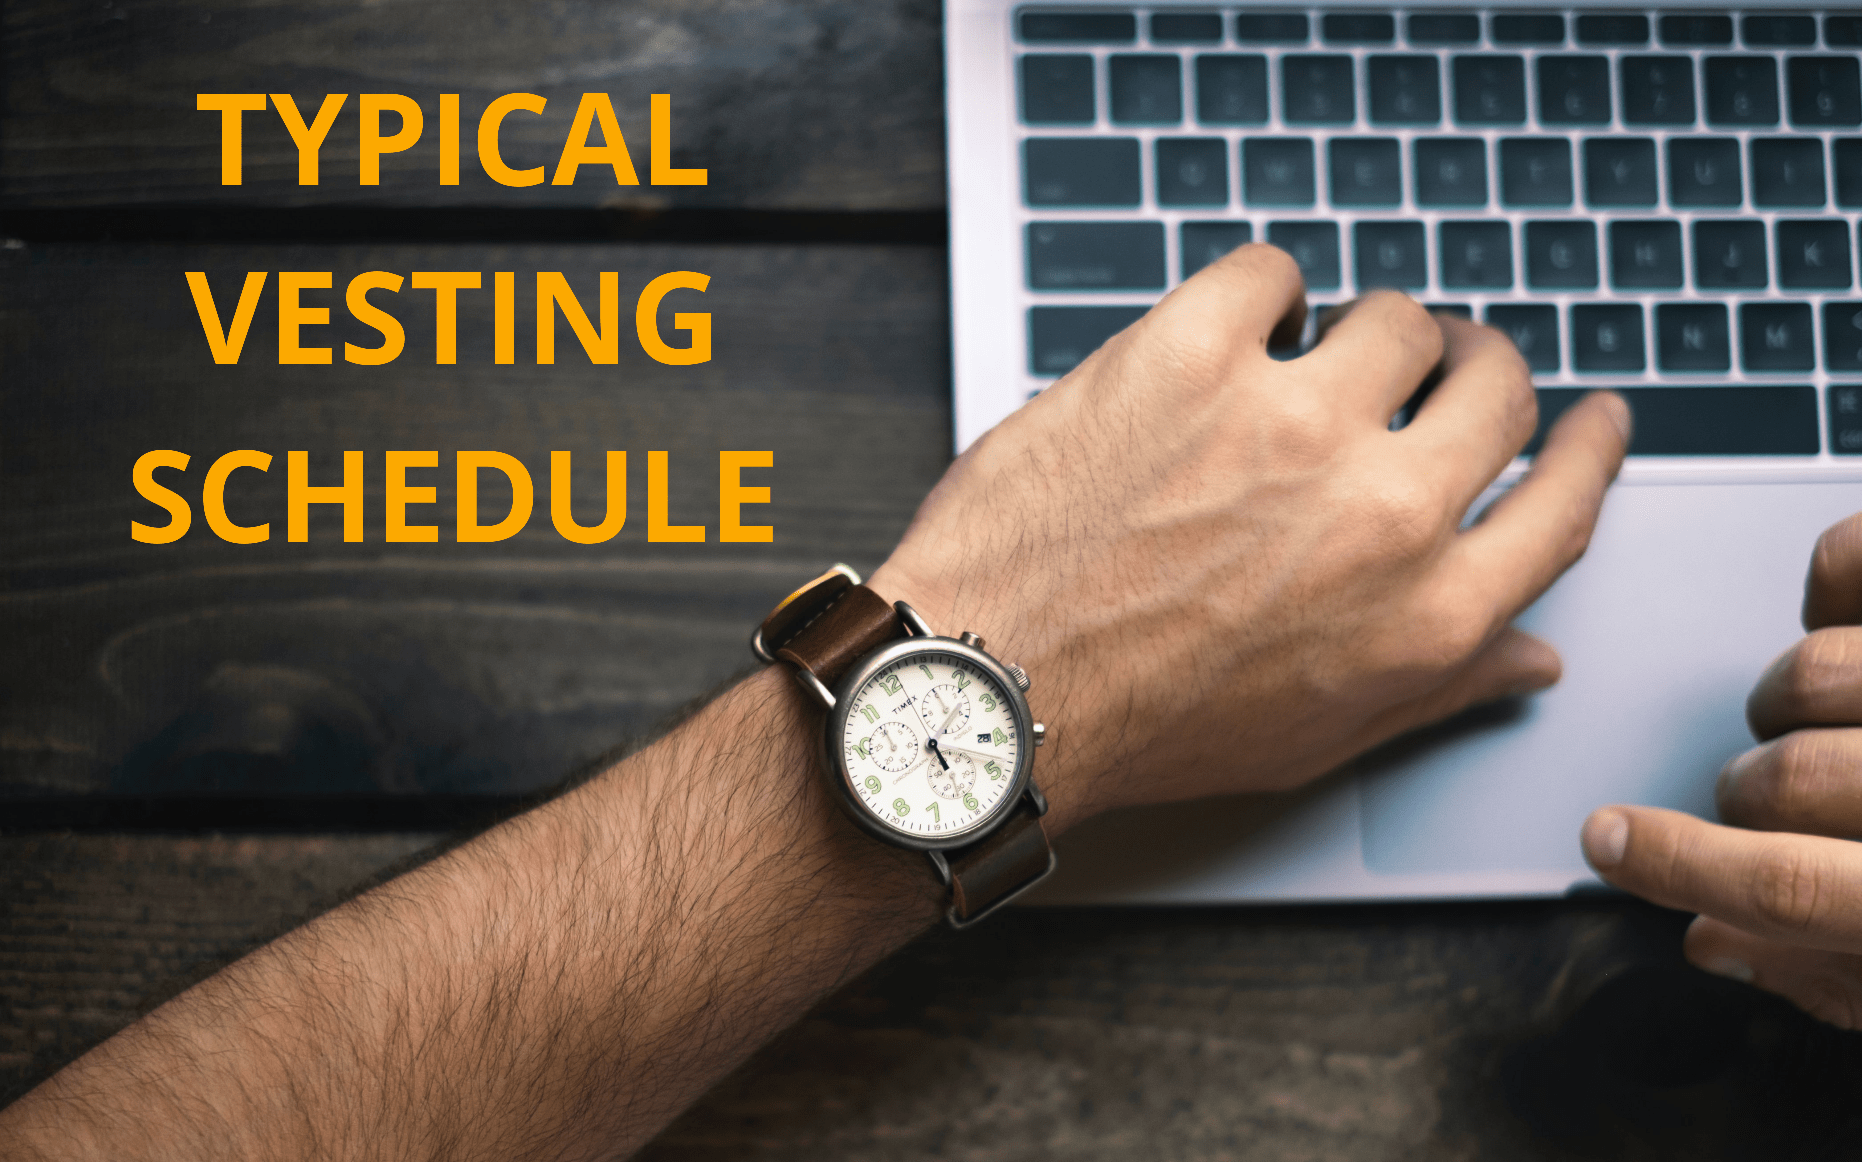 How Does a Typical Vesting Schedule Function and What Are Its Advantages